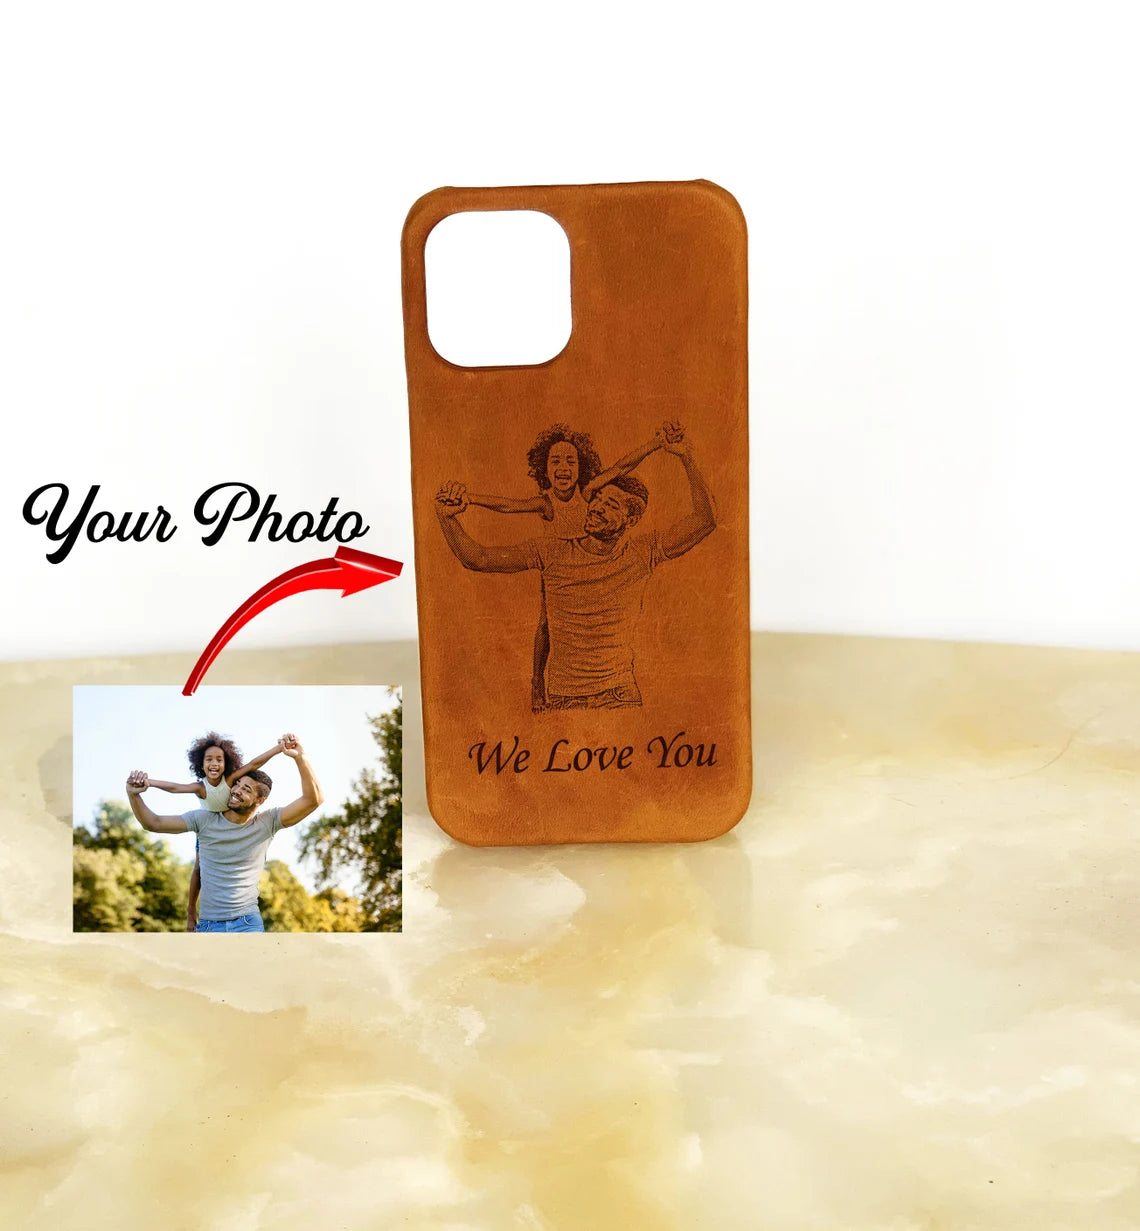 Bridesmaid Gifts, 12 Pro Max iPhone Case With Photo Personalized Leather Cover, iPhone 12/12 Pro/12 Pro Max/12 Mini/11 Pro/ 11 Pro Max Case